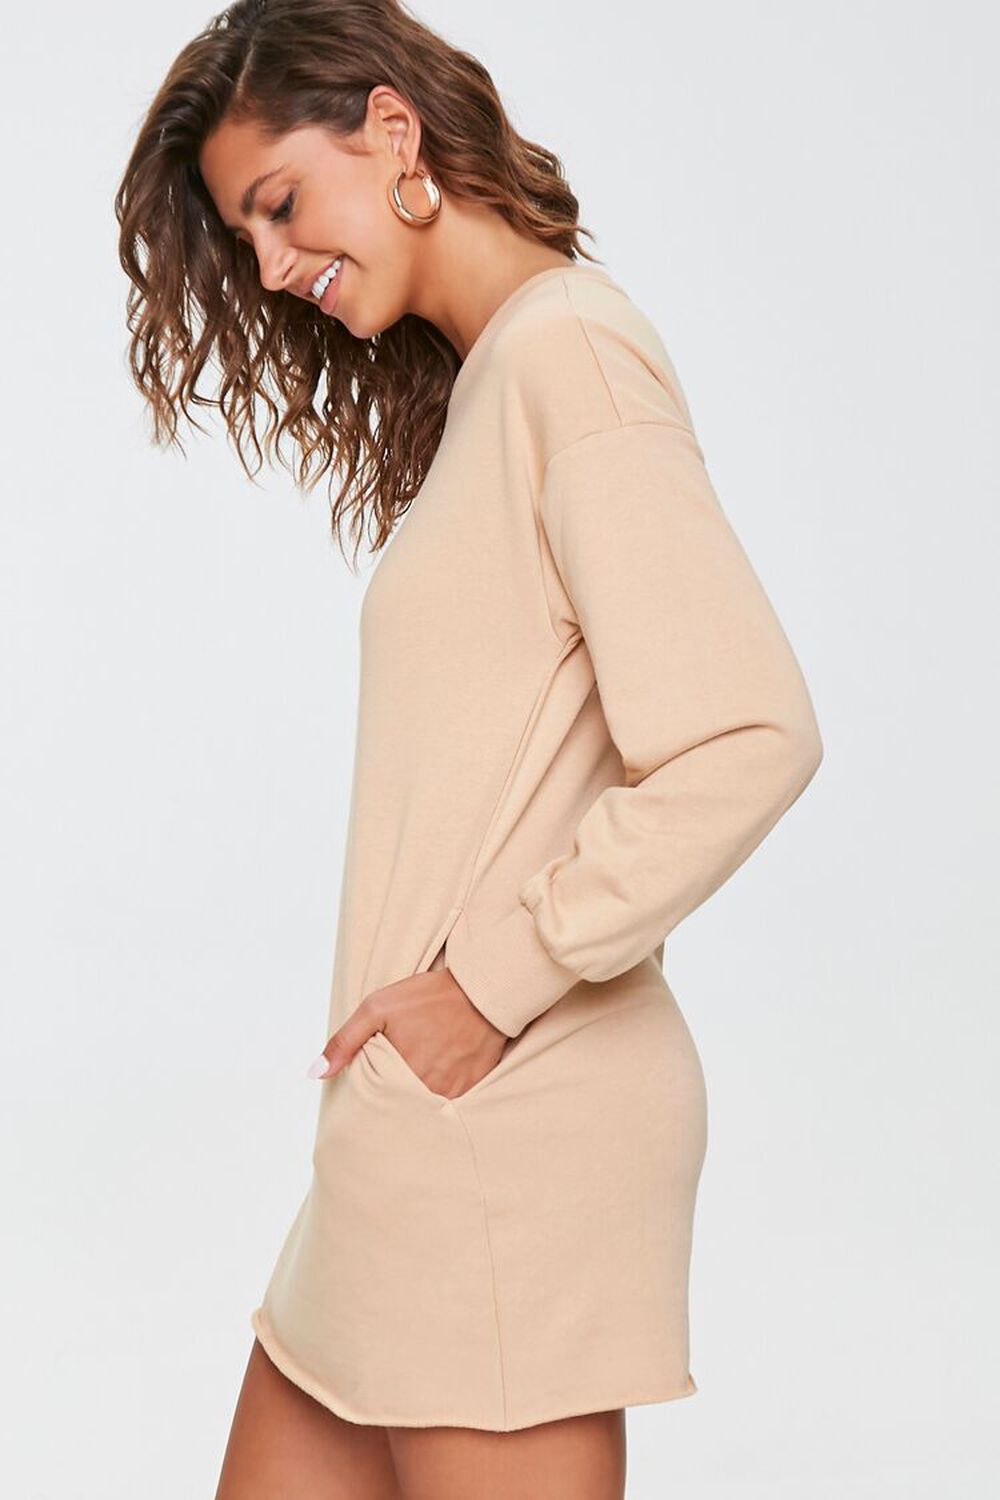 TAUPE French Terry Sweatshirt Dress, image 2